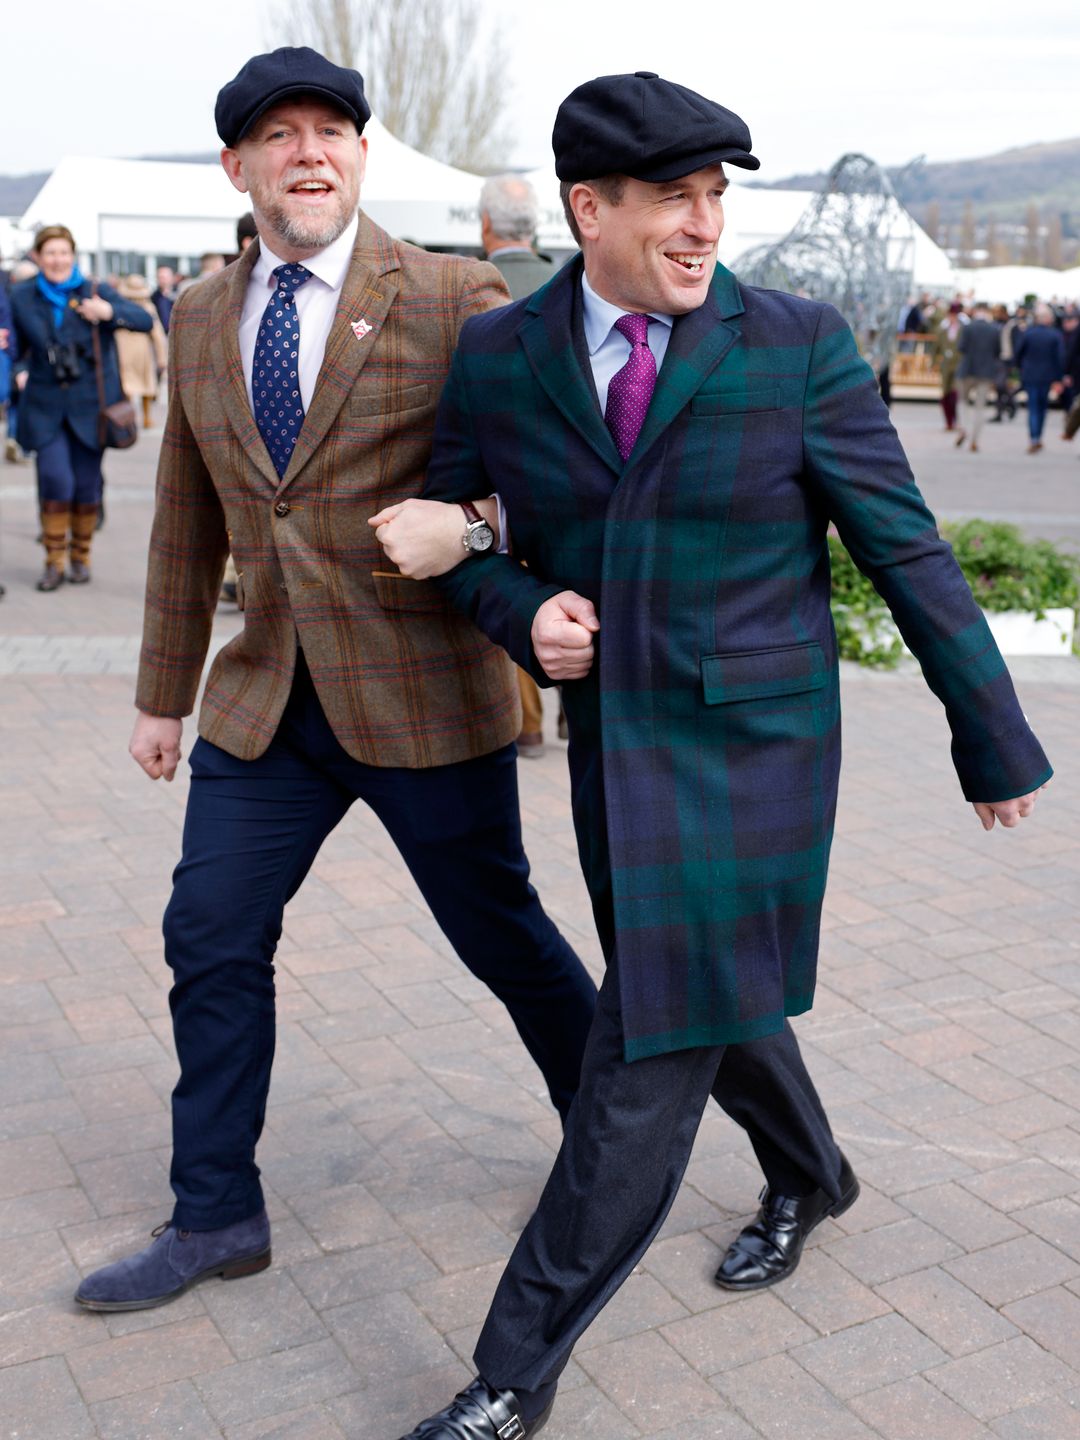 Mike Tindall and Peter Phillips wearing checked suits and flat caps for Cheltenham Festival